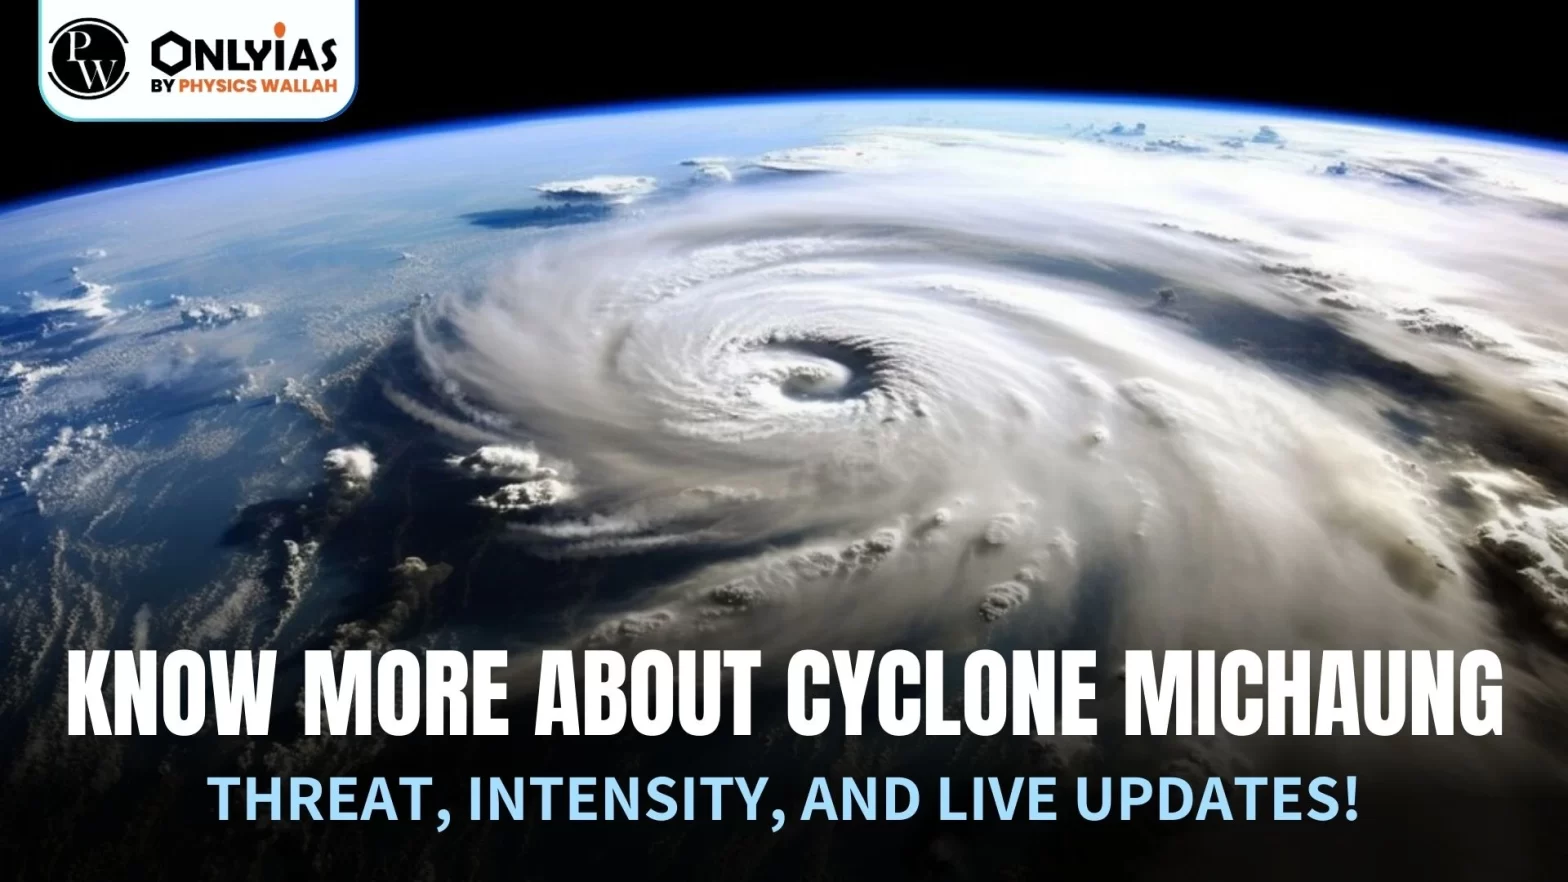 Know more about Cyclone Michaung: Threat, Intensity, and Live Updates!